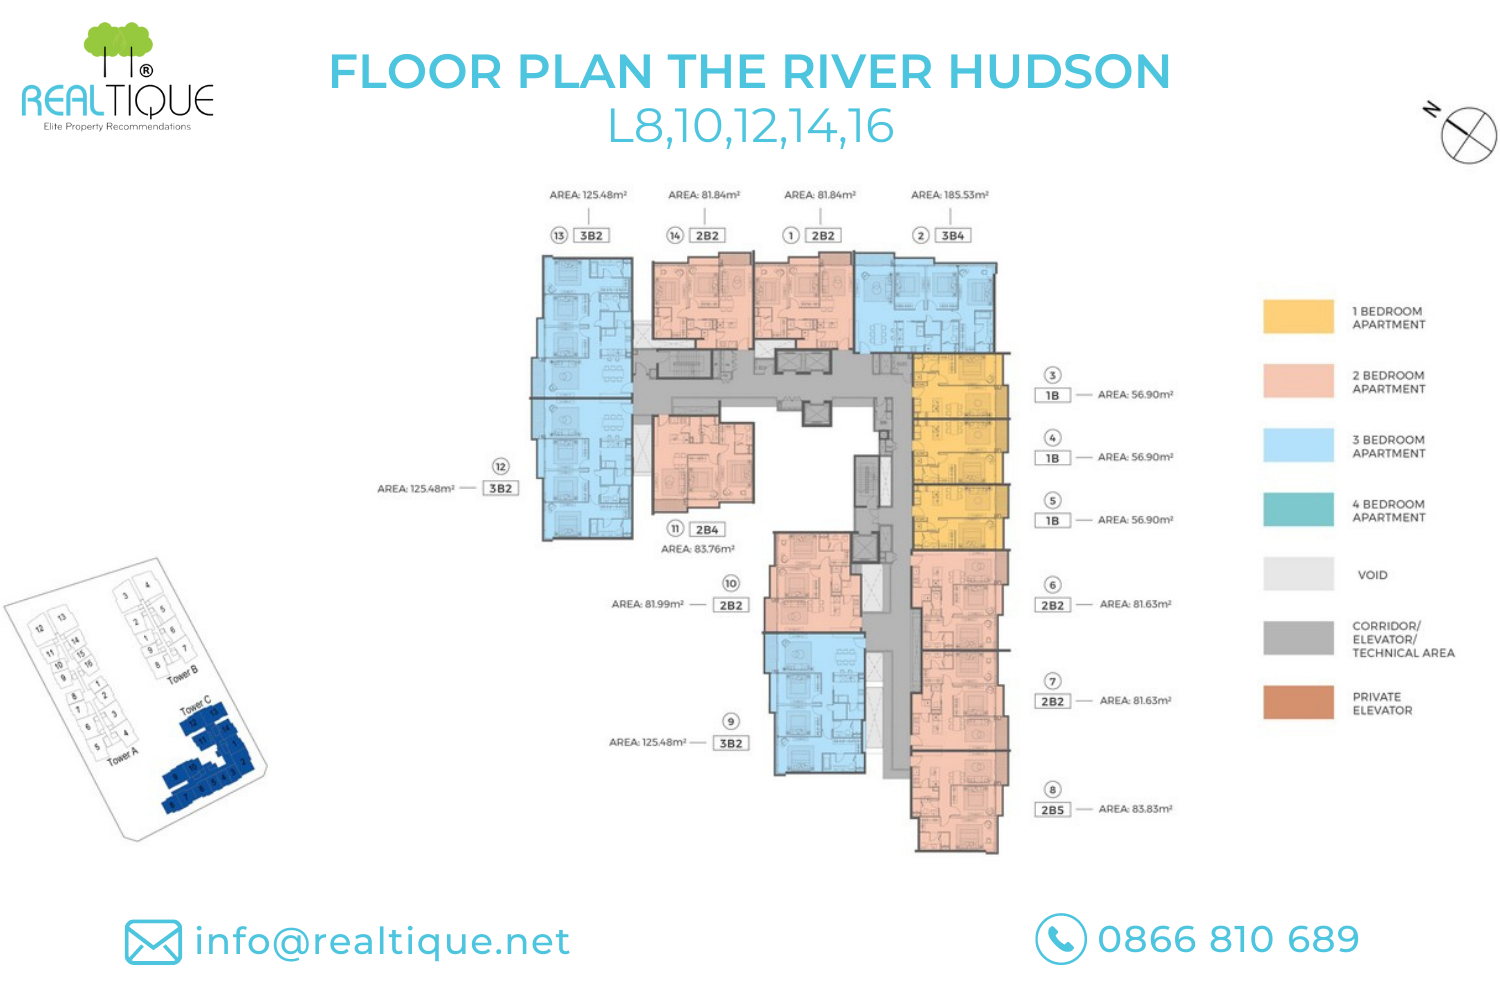 Typical floor plan of Tower River Hudson, The River Thu Thiem